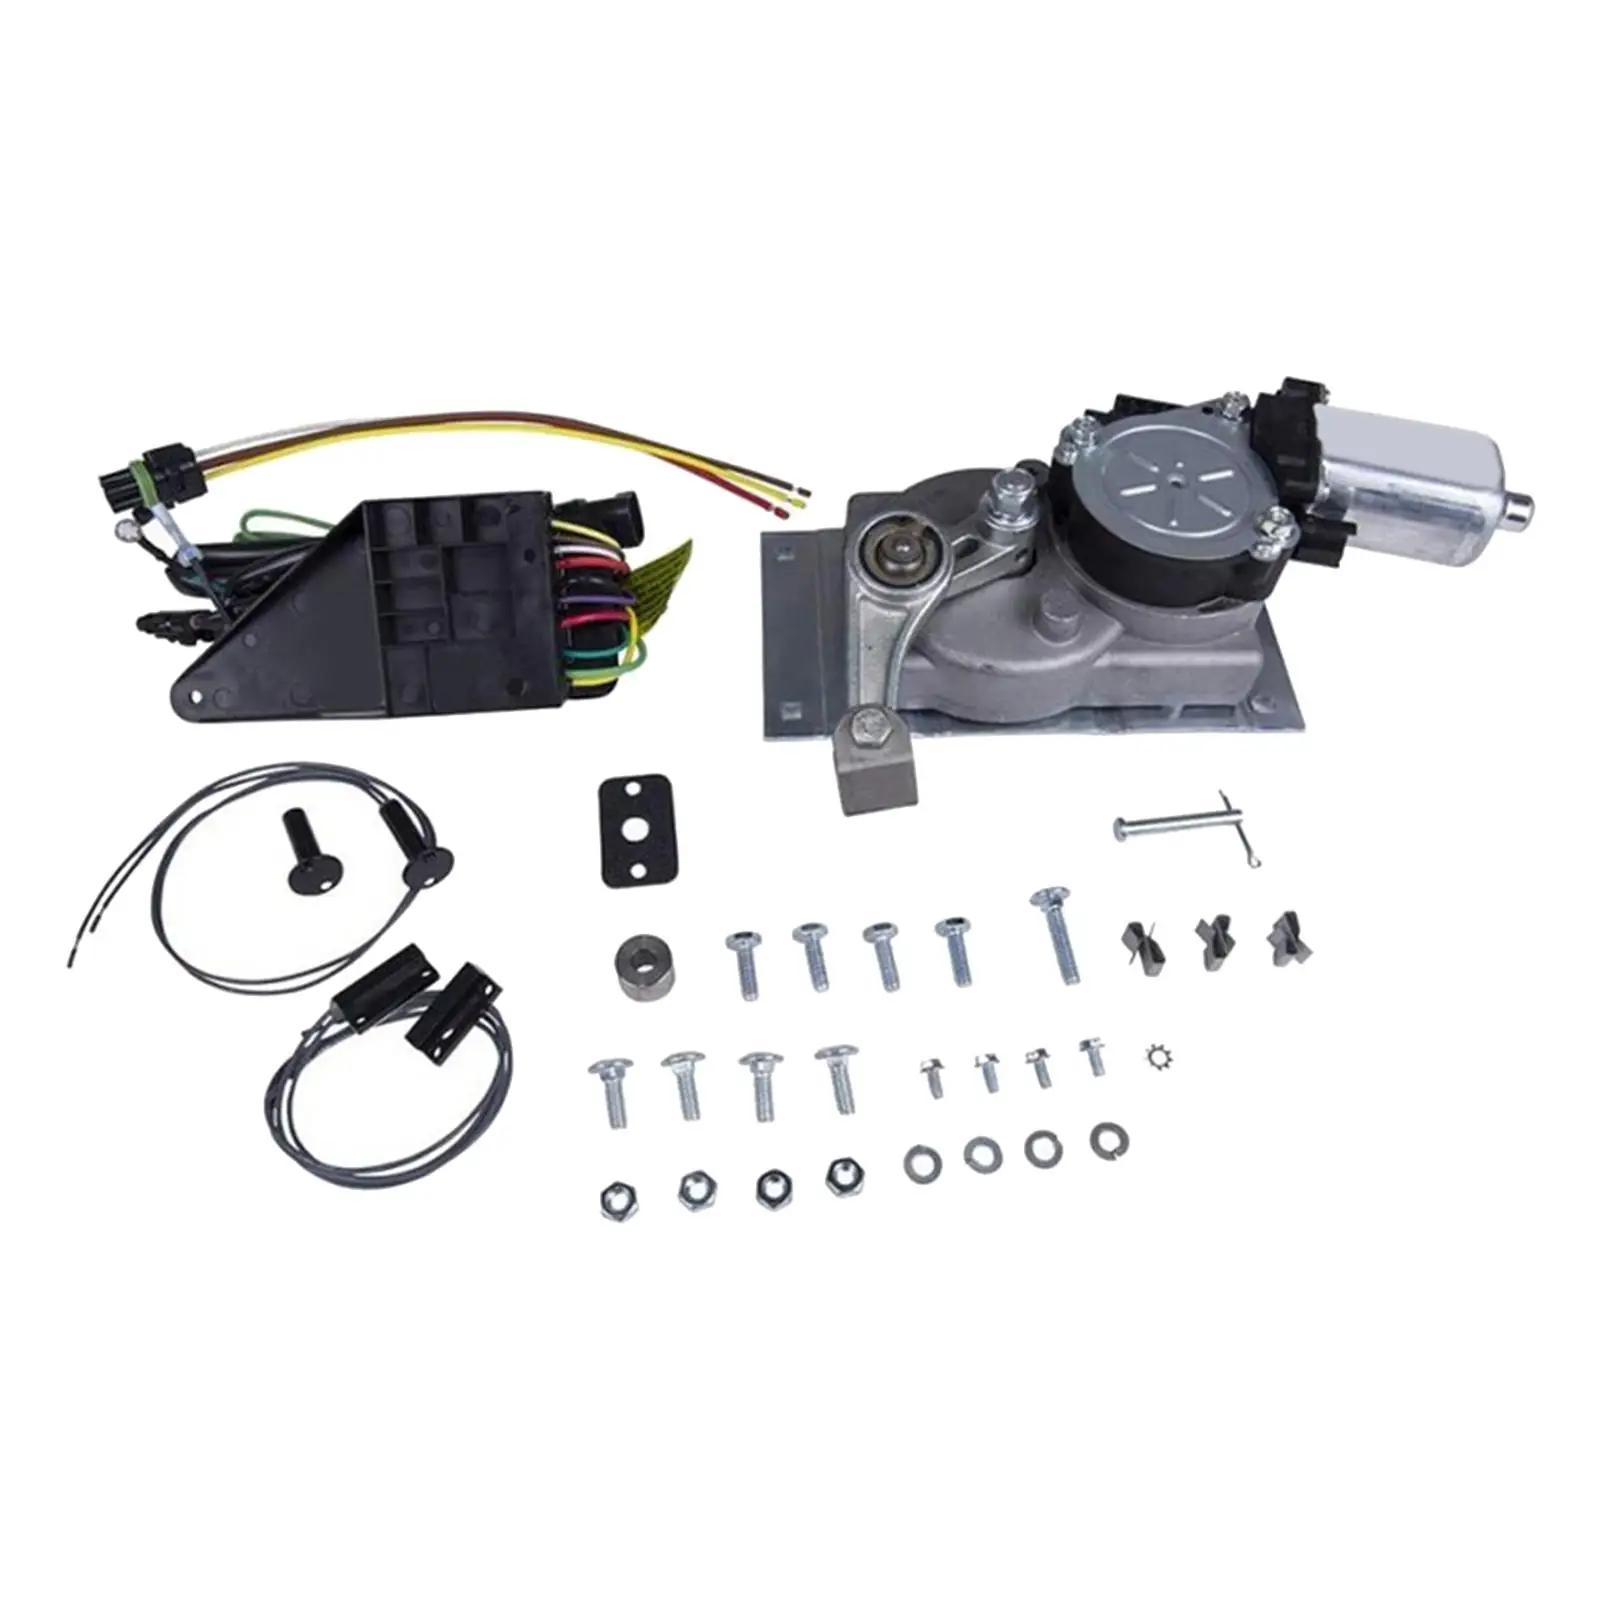 RV Step Motor Replacement Motor Conversion Kit for Truck B Linkage Rvs